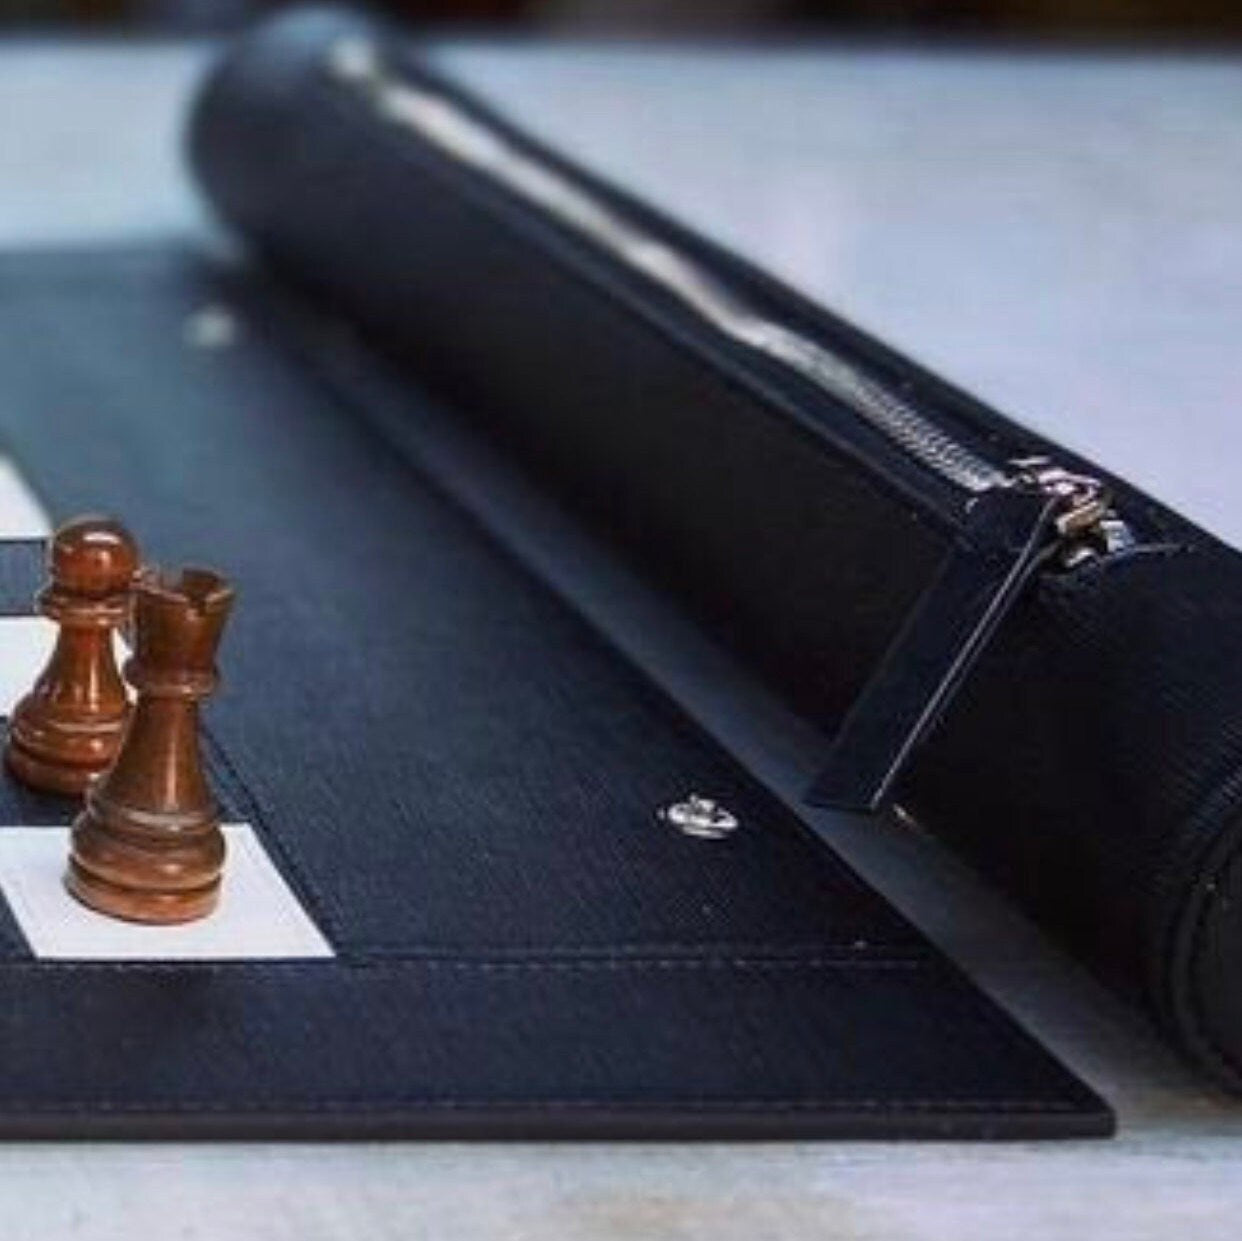 Handmade Leather Luxury Handmade Roll Up Chess Board/ High Quality Portable Leather Travel Chess Set / Wooden Chess Pieces Father's Day Gift